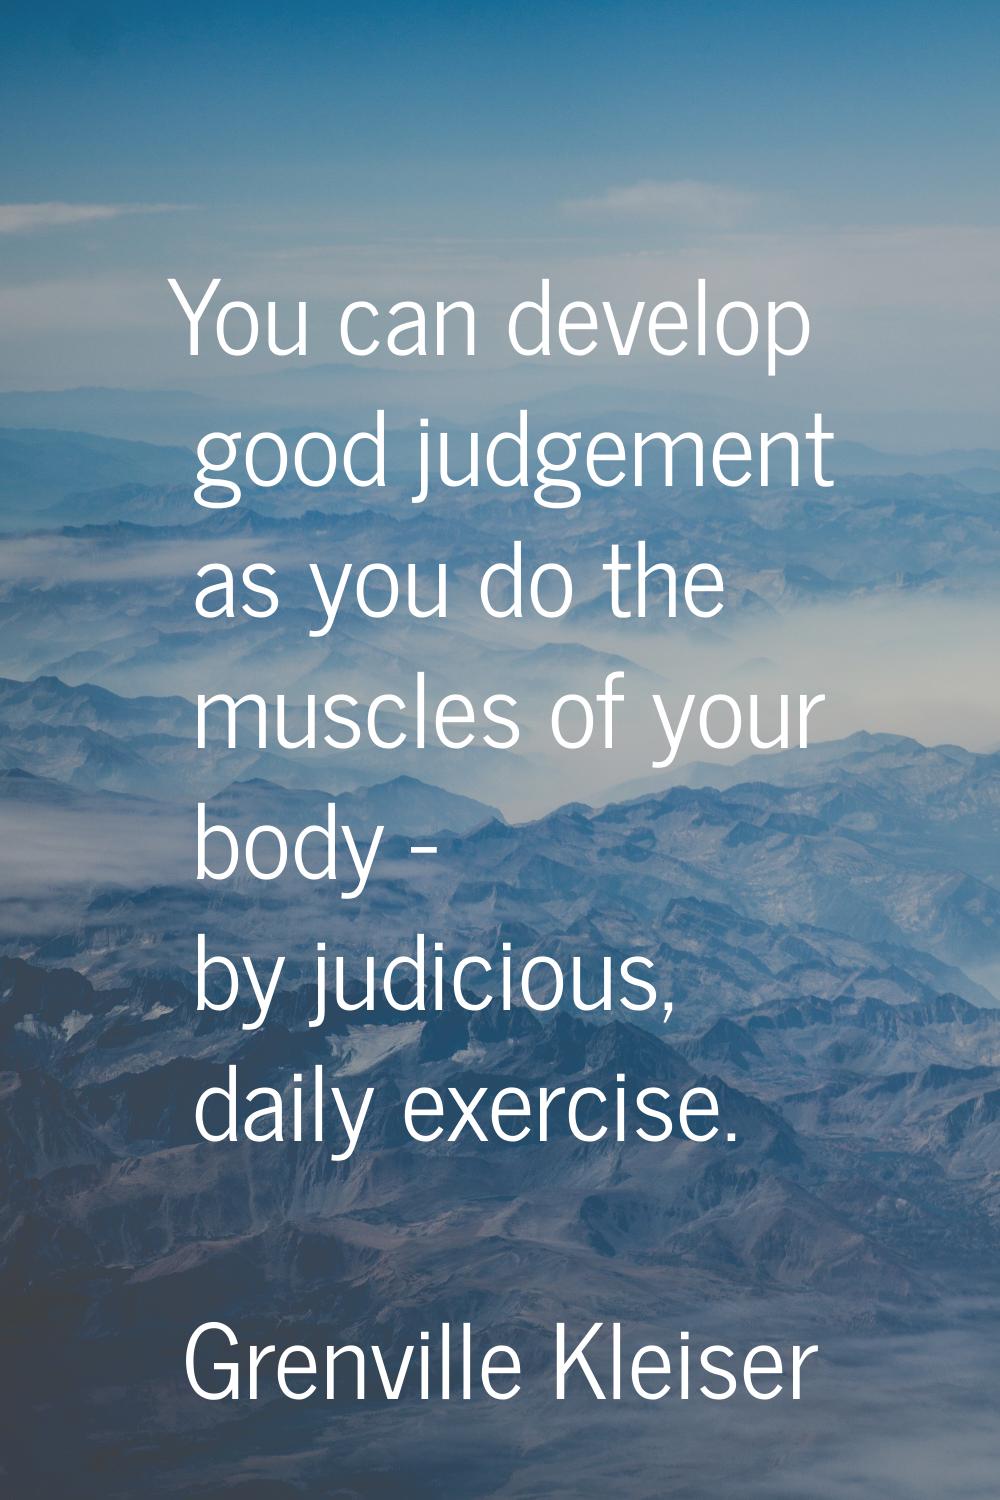 You can develop good judgement as you do the muscles of your body - by judicious, daily exercise.